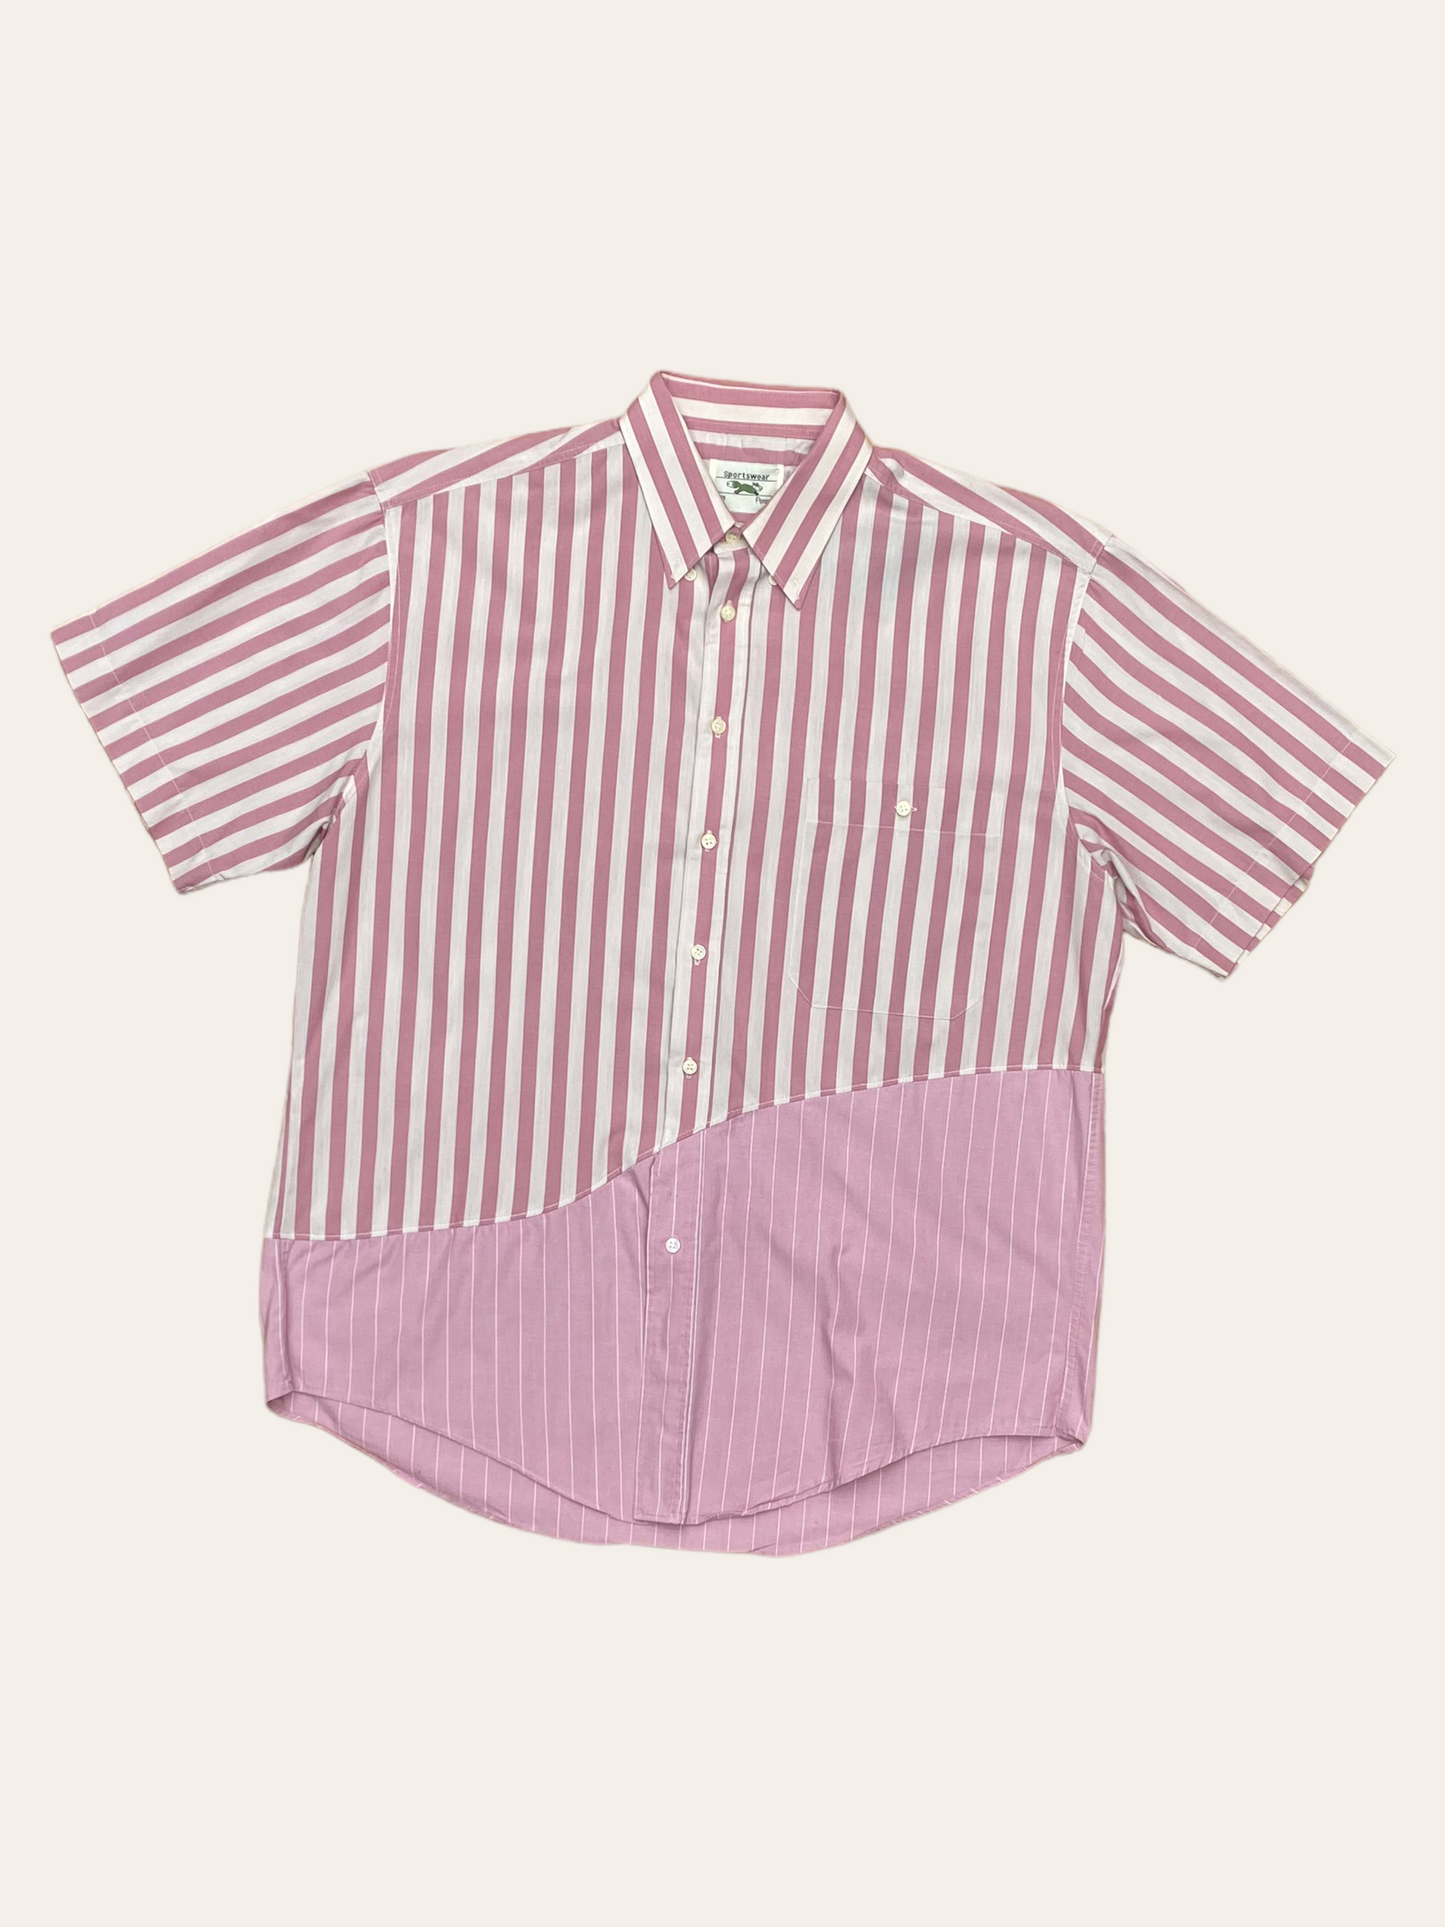 SHIRT UPCYCLED PINK LINED  (M)